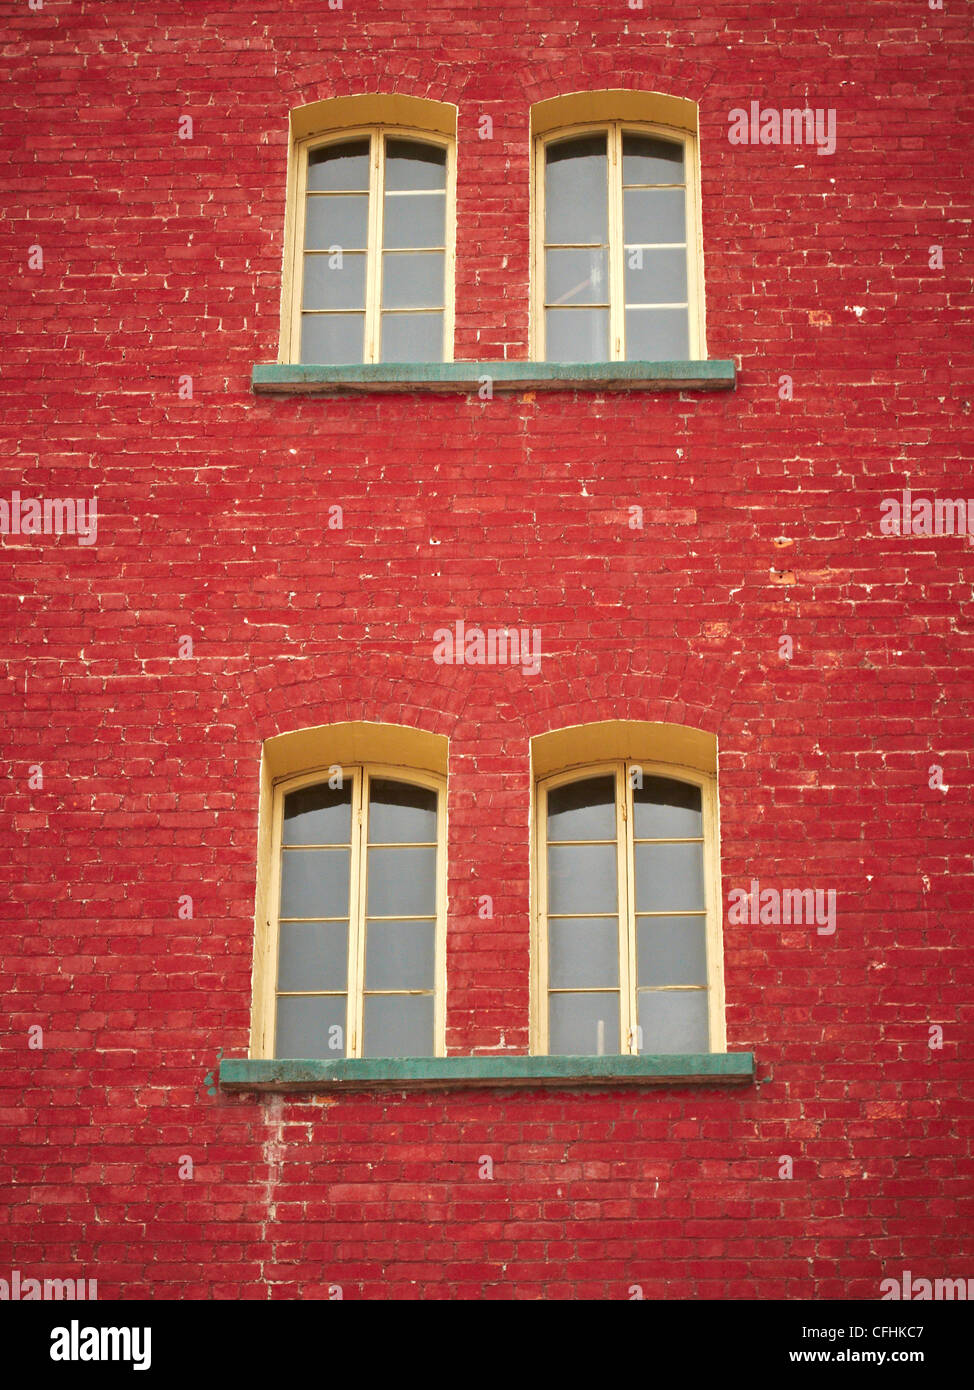 Old red brick building with four windows close together Stock Photo